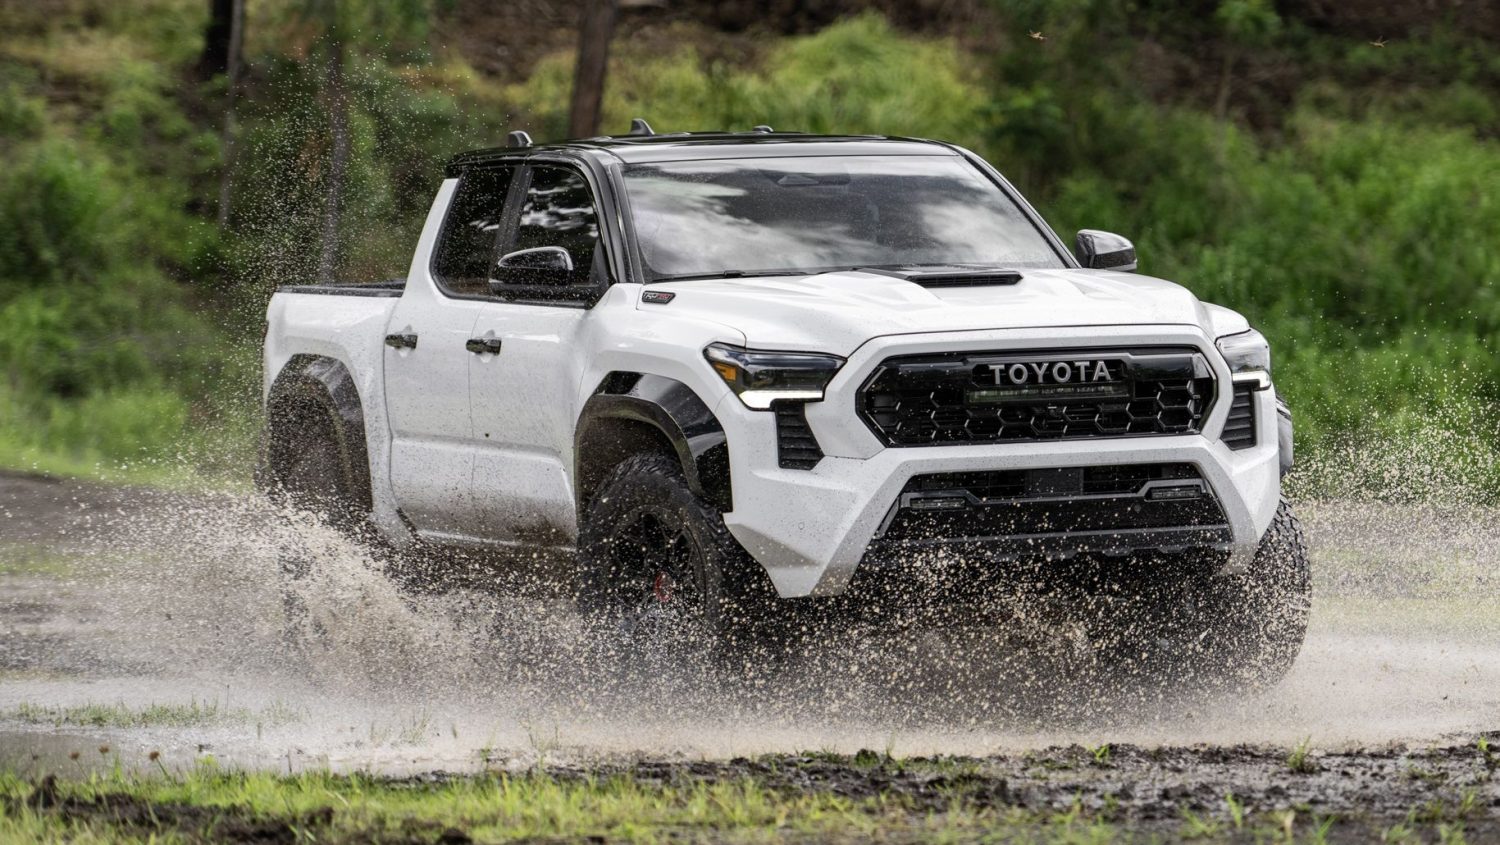 For the new generation Tacoma, Toyota engineers focused on maintaining its long history of quality, dependability, and durability.